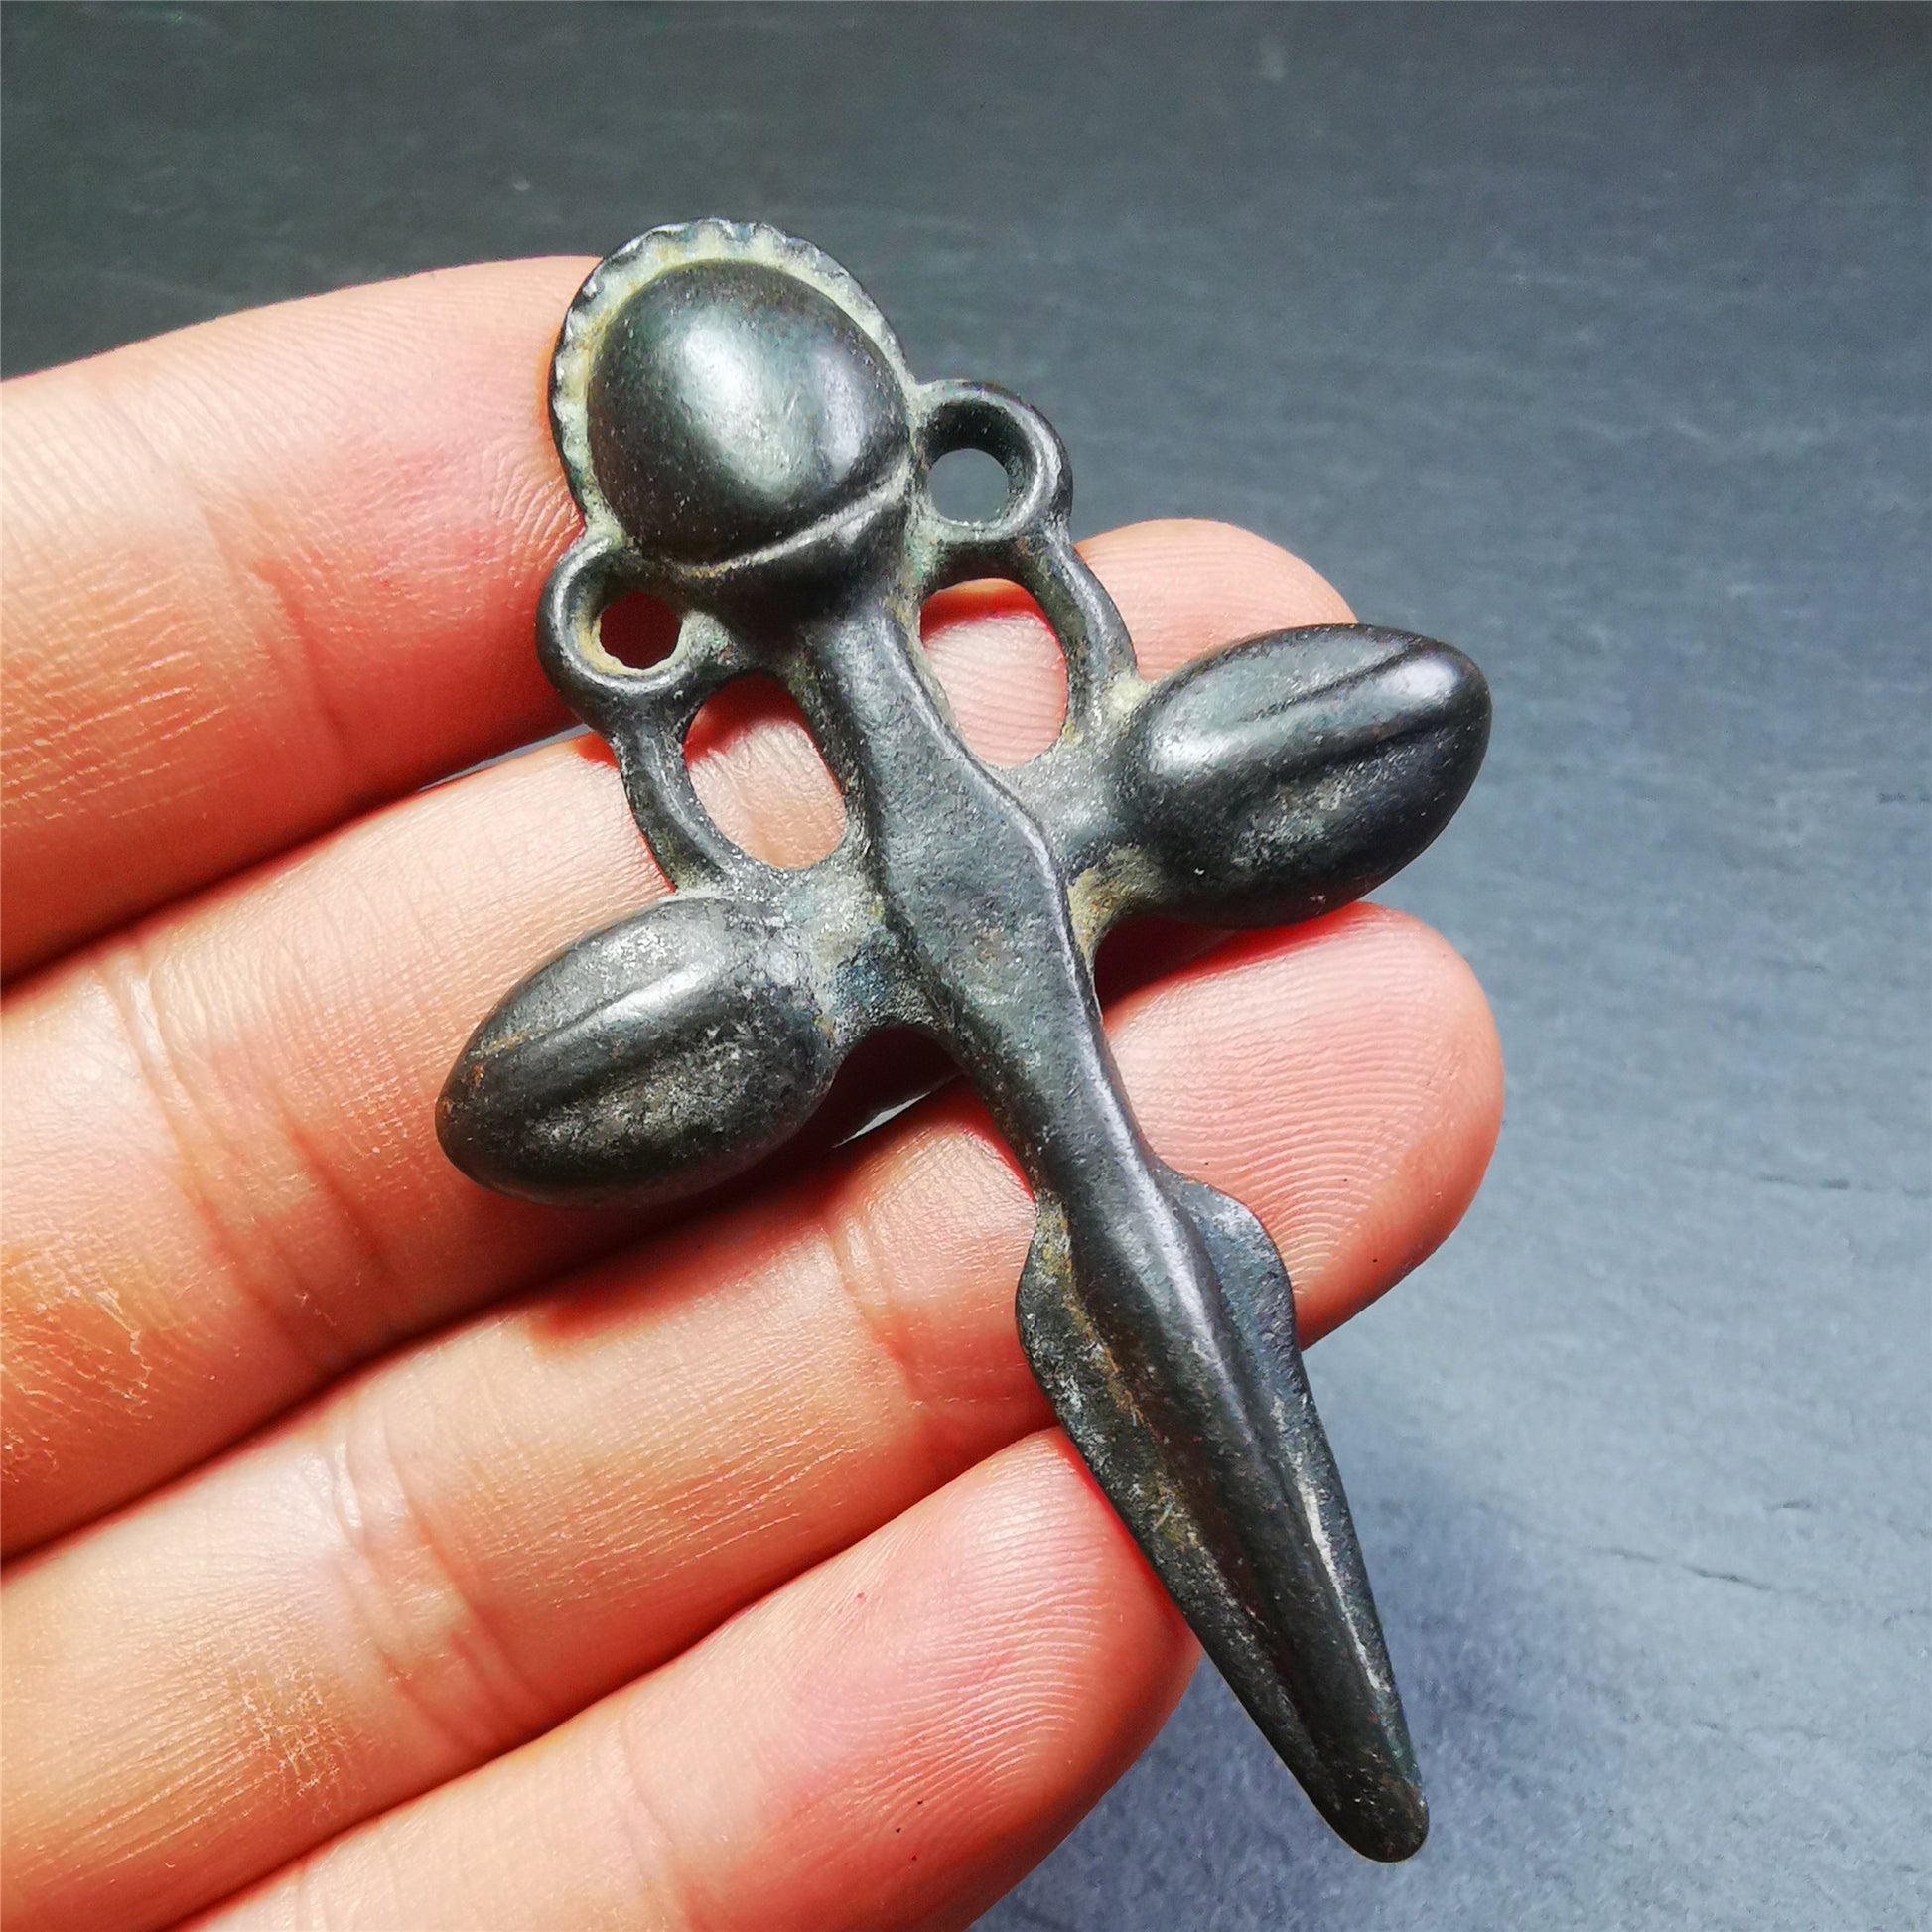 This beautiful phurba pendant is hand carved by Tibetan craftsmen from Tibet in 1960's. It is made of thokcha,full of black color,the upper part is a horizontal vajra, and the lower part is a phurba,size is 2.6 by 1.7 inches